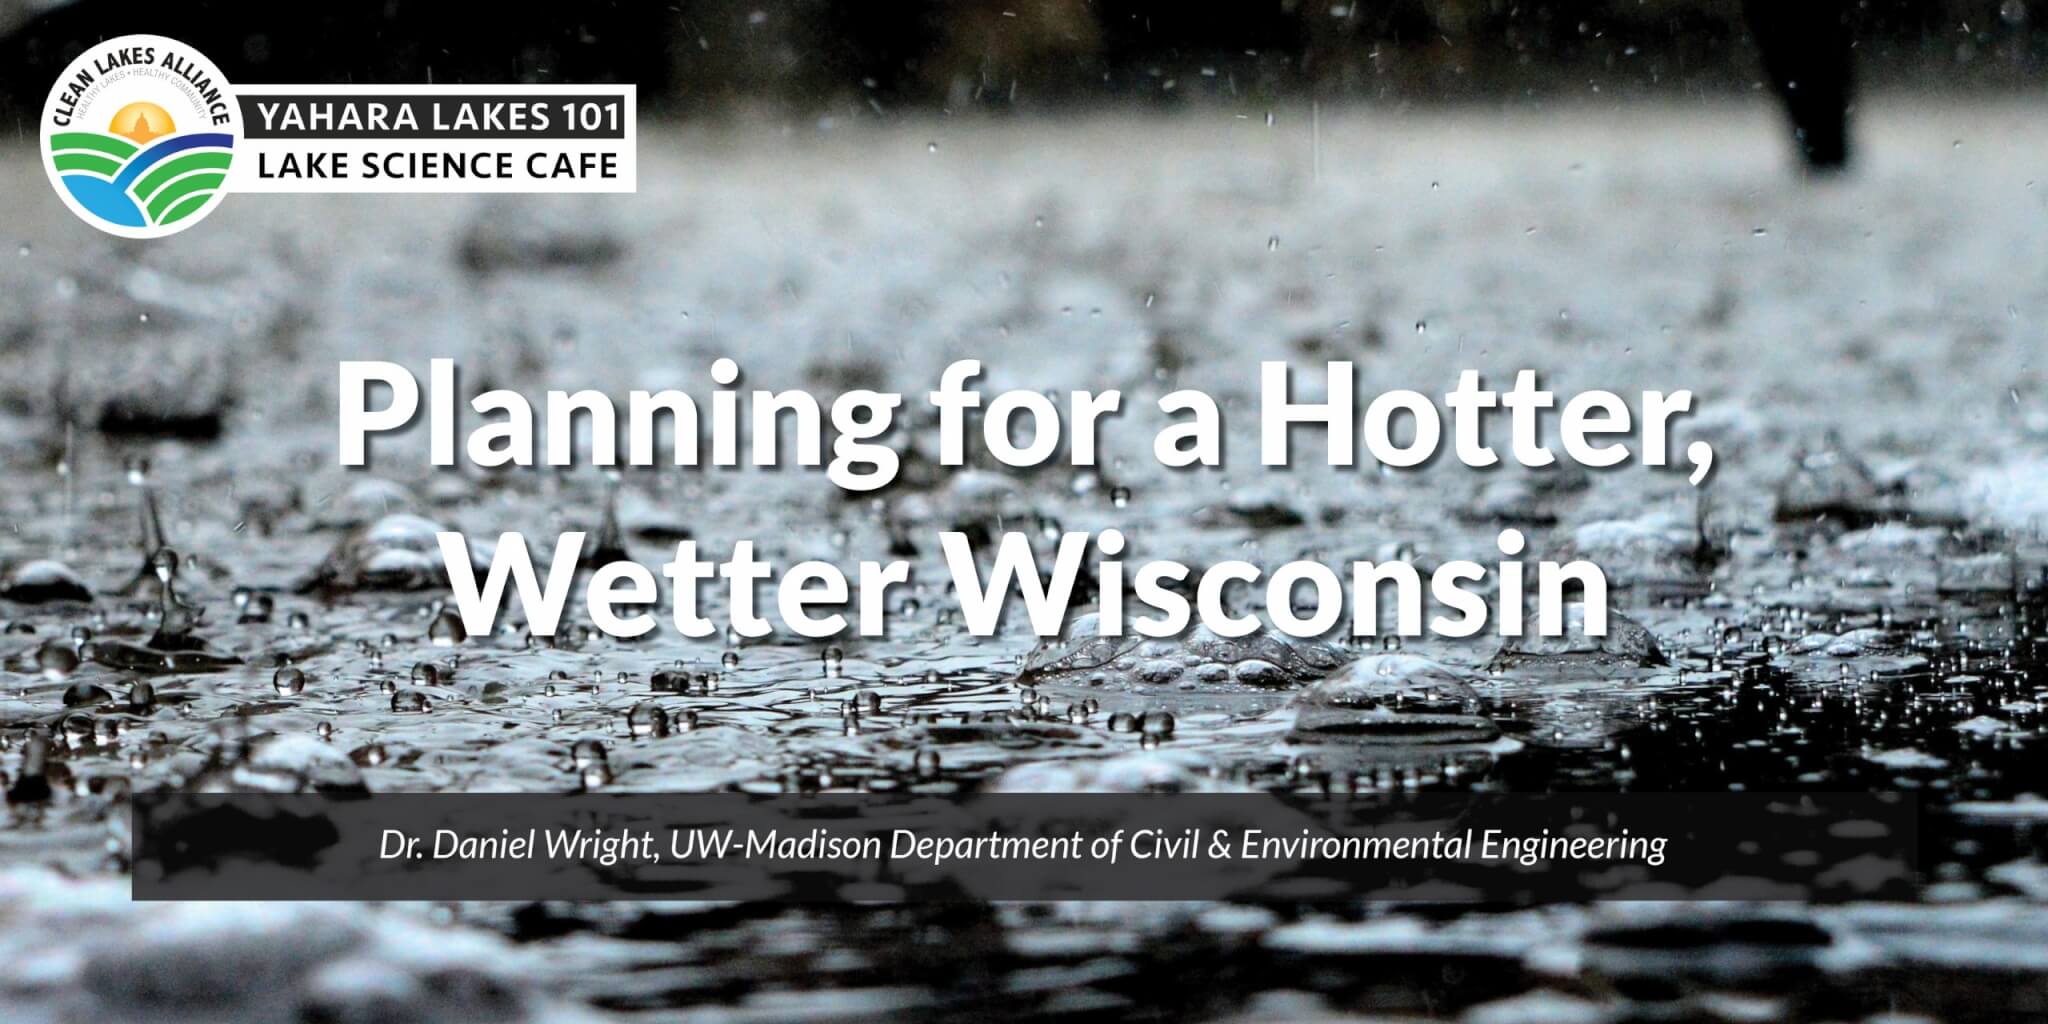 Yahara Lakes 101: Planning for a Hotter, Wetter, Wisconsin